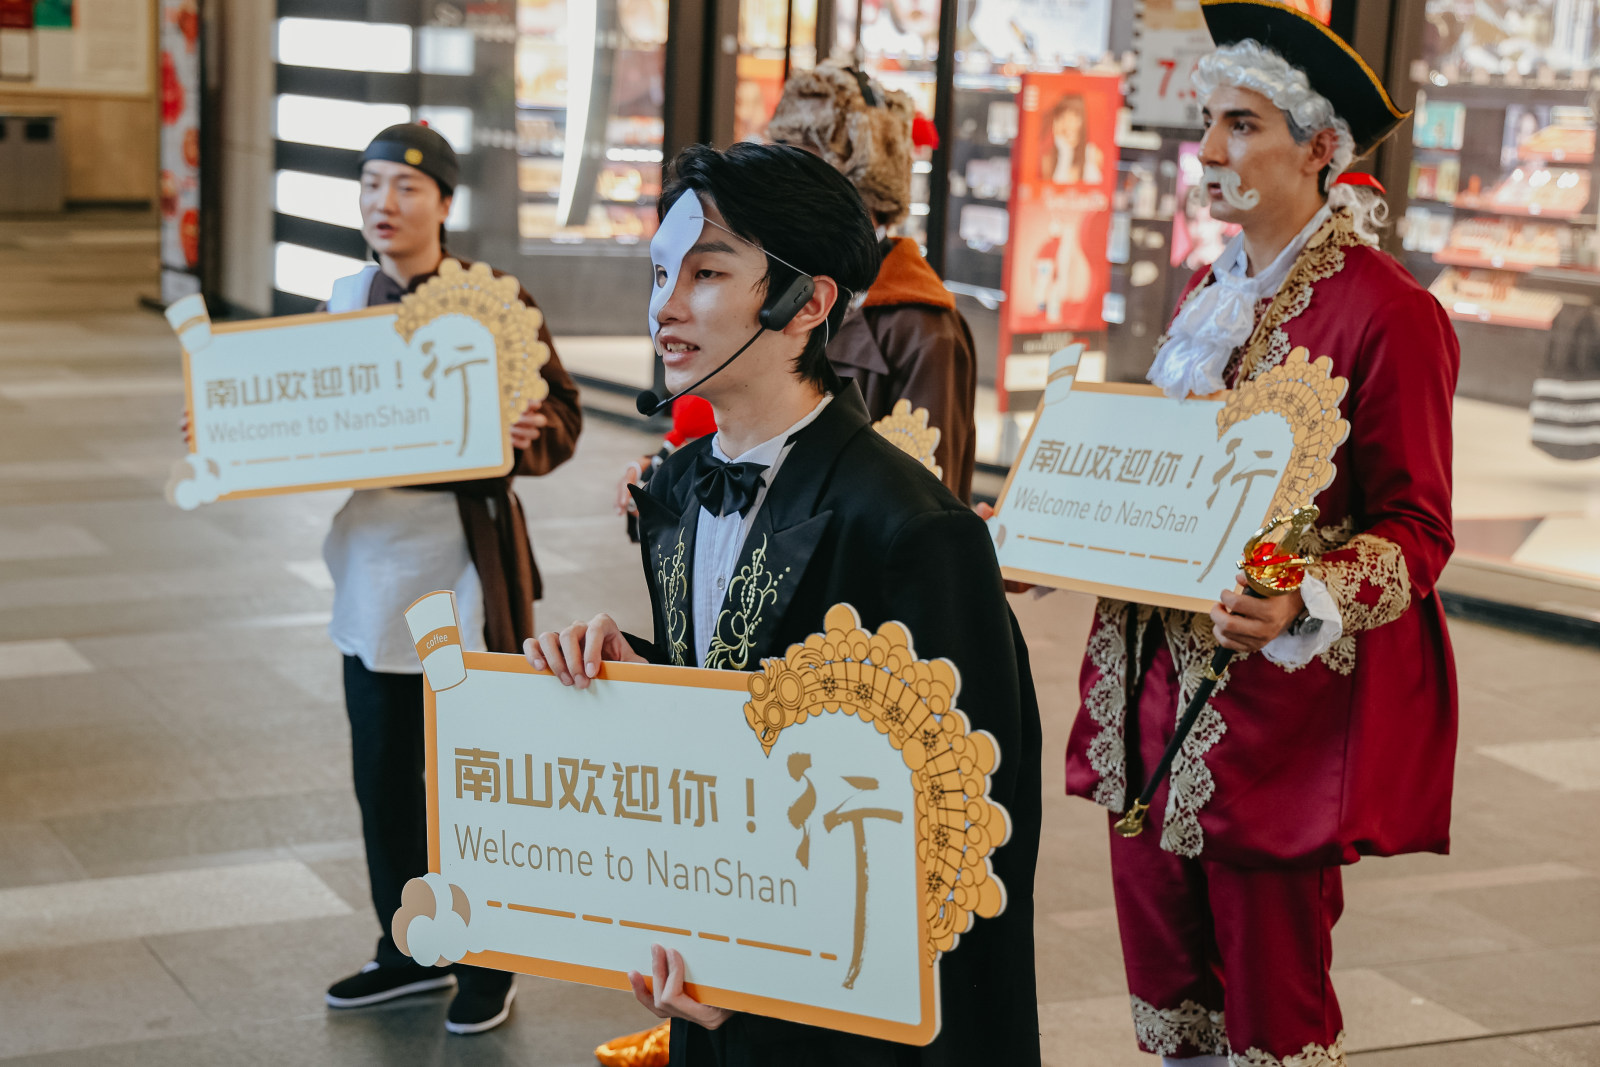 Performers at the 2023 Nanshan Theatre Festival dressed up in costume to welcome theater goers in Shenzhen. /Photo provided to CGTN